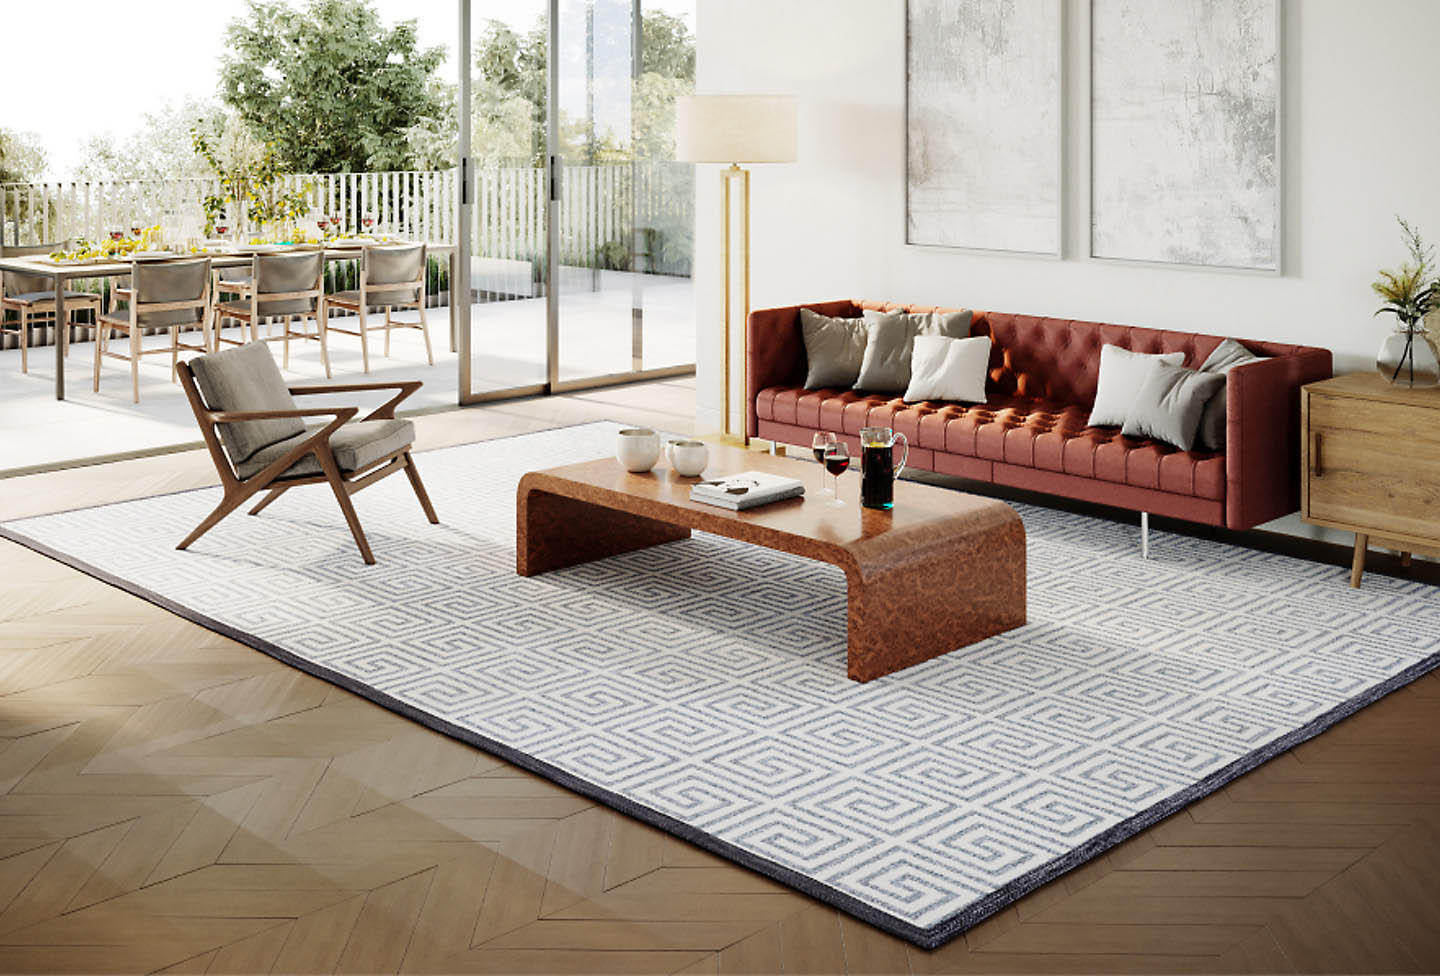 Rugs Versus Carpet – Which Should You Choose?